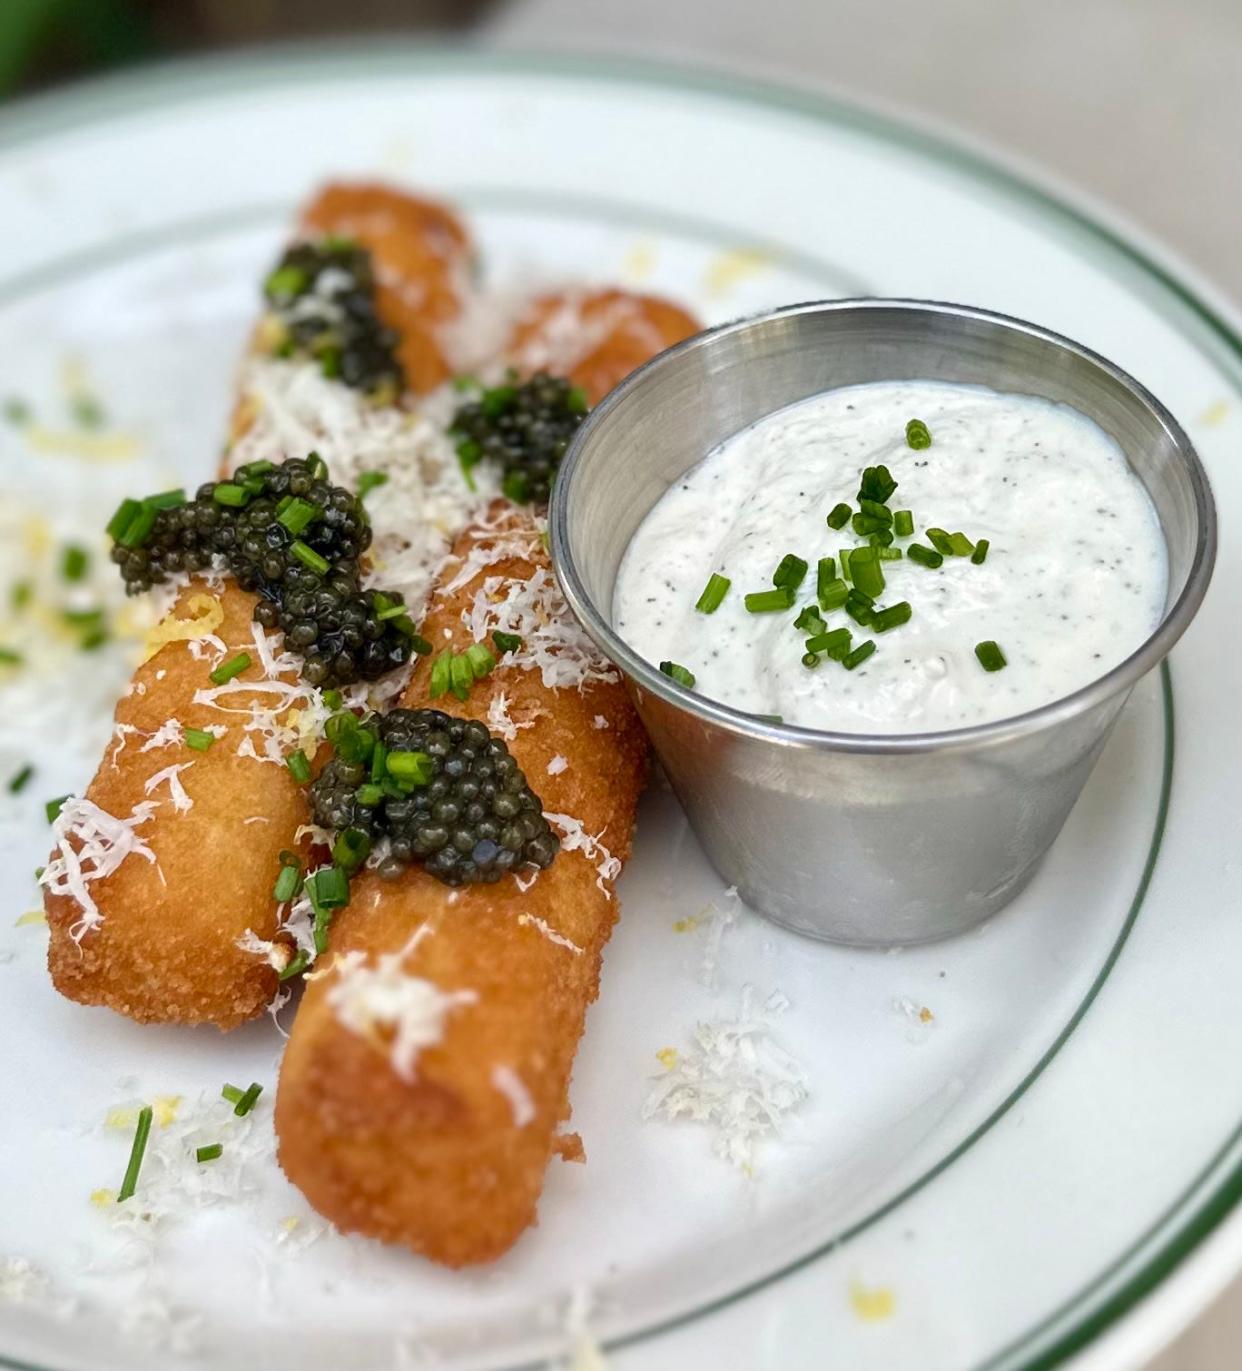 Bill's Oyster goes a little tongue in cheek by blending the high (caviar) and low (mozzarella sticks)